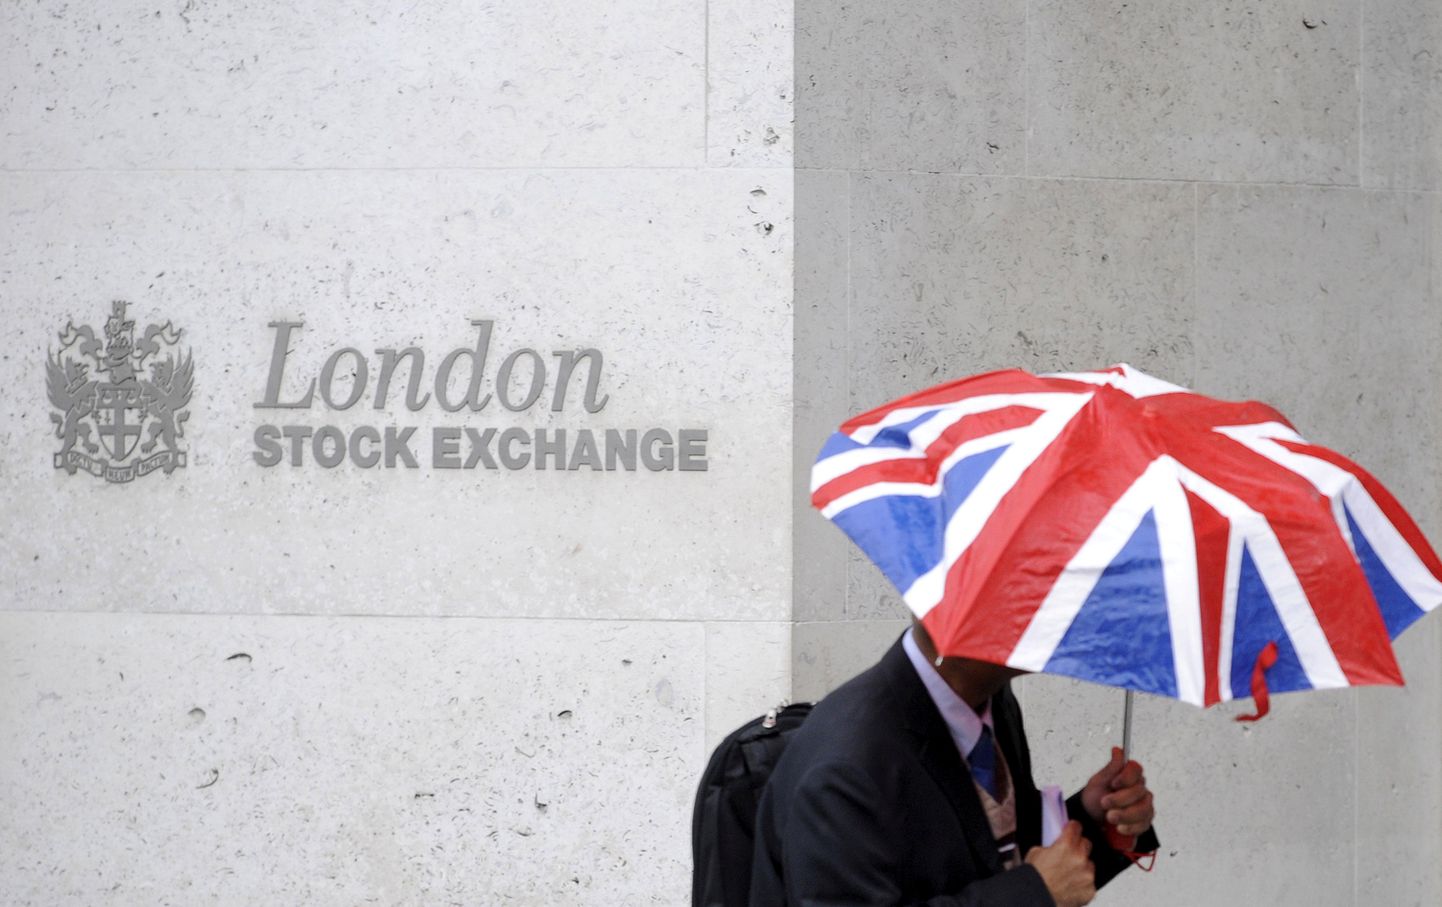 A worker shelters from the rain under a Union Flag umbrella as he passes the London Stock Exchange in London, Britain, October 1, 2008.  REUTERS/Toby Melville/File Photo